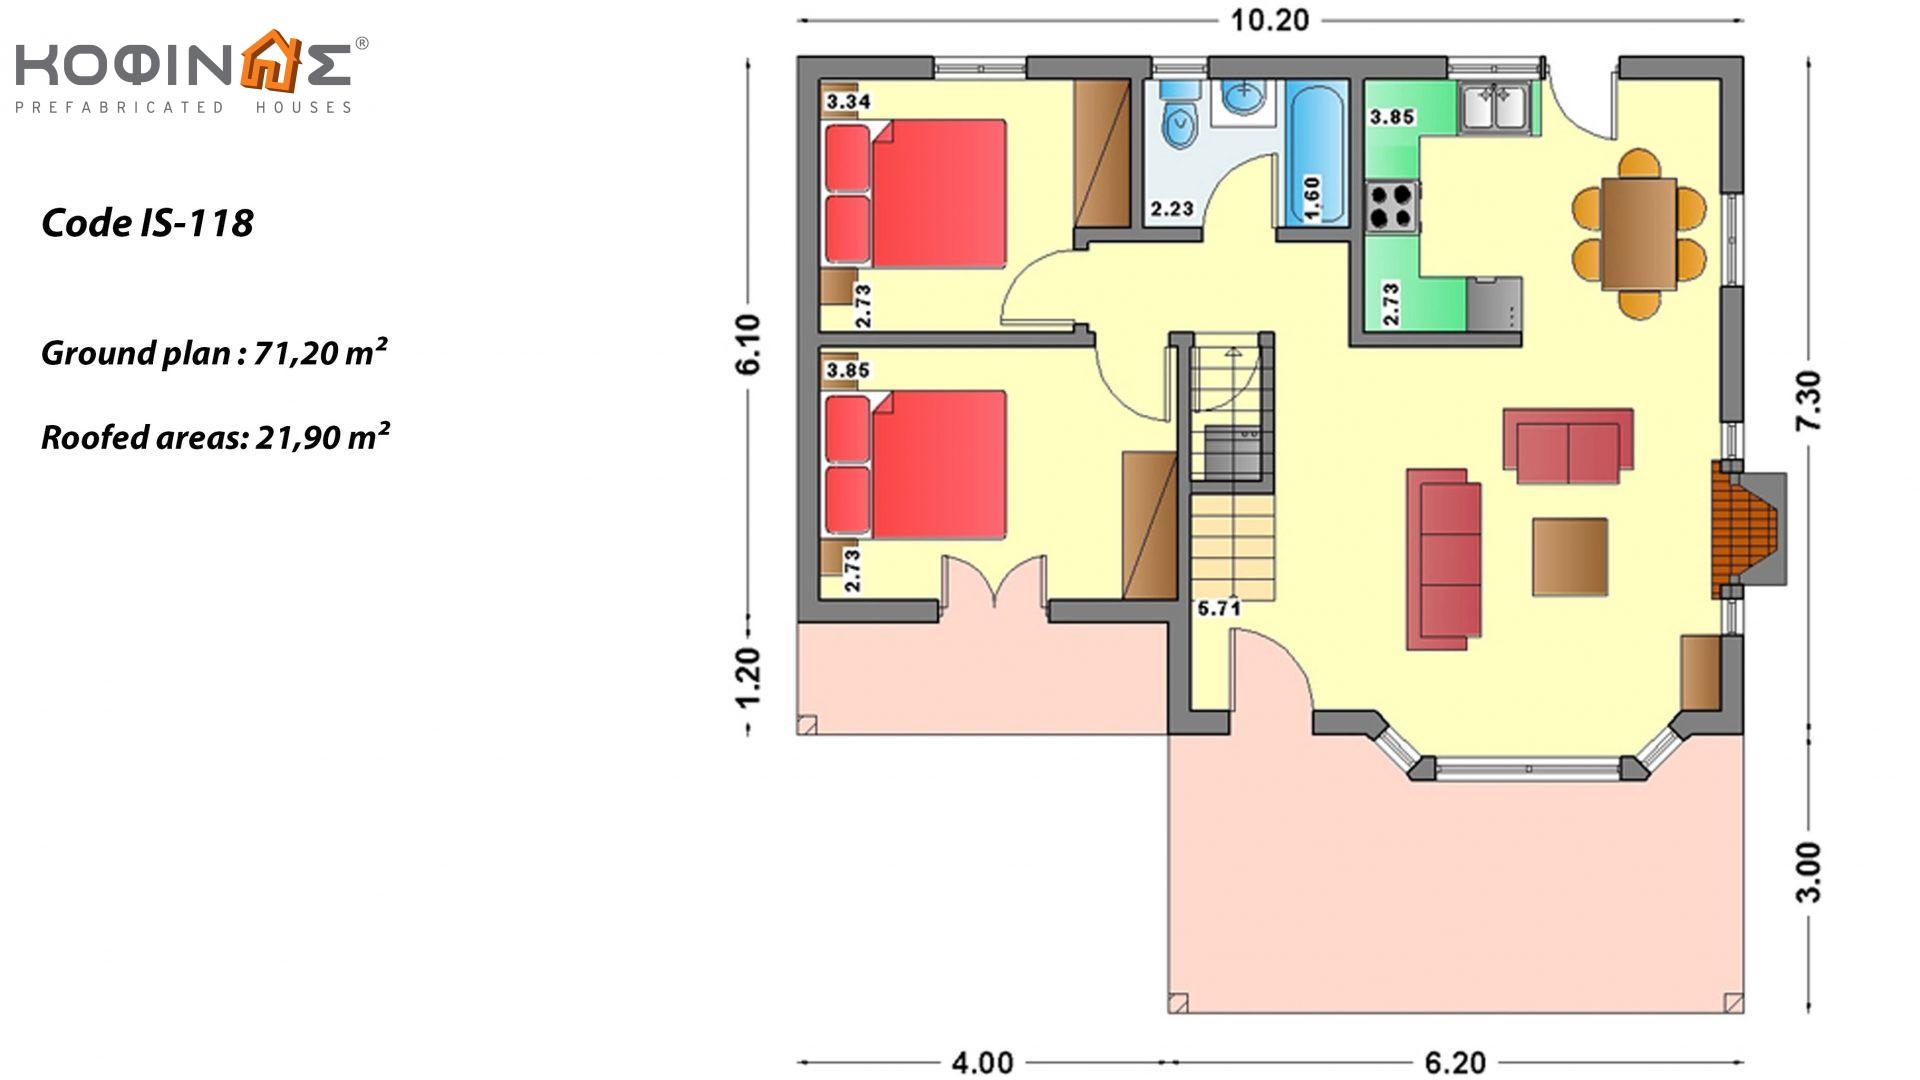 1-story house with attic IS-118, total surface of 118,20 m² ,covered roofed areas 21,90 m²